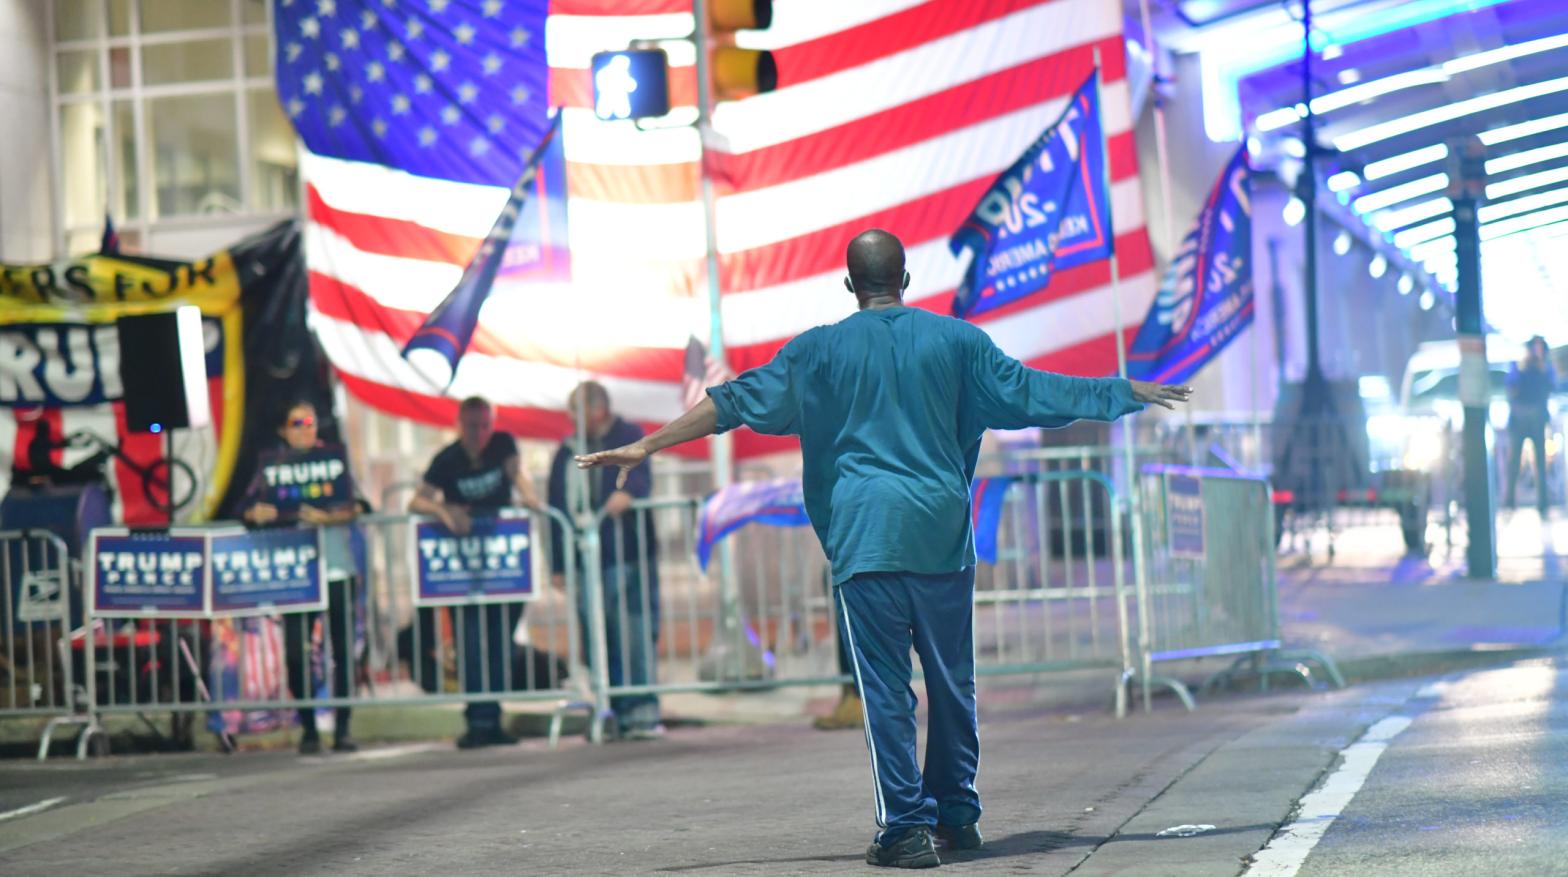 A man approaches supporters of President Donald Trump demonstrating outside of where votes were being counted six days after the general election on November 9, 2020 in Philadelphia. (Photo: Mark Makela, Getty Images)